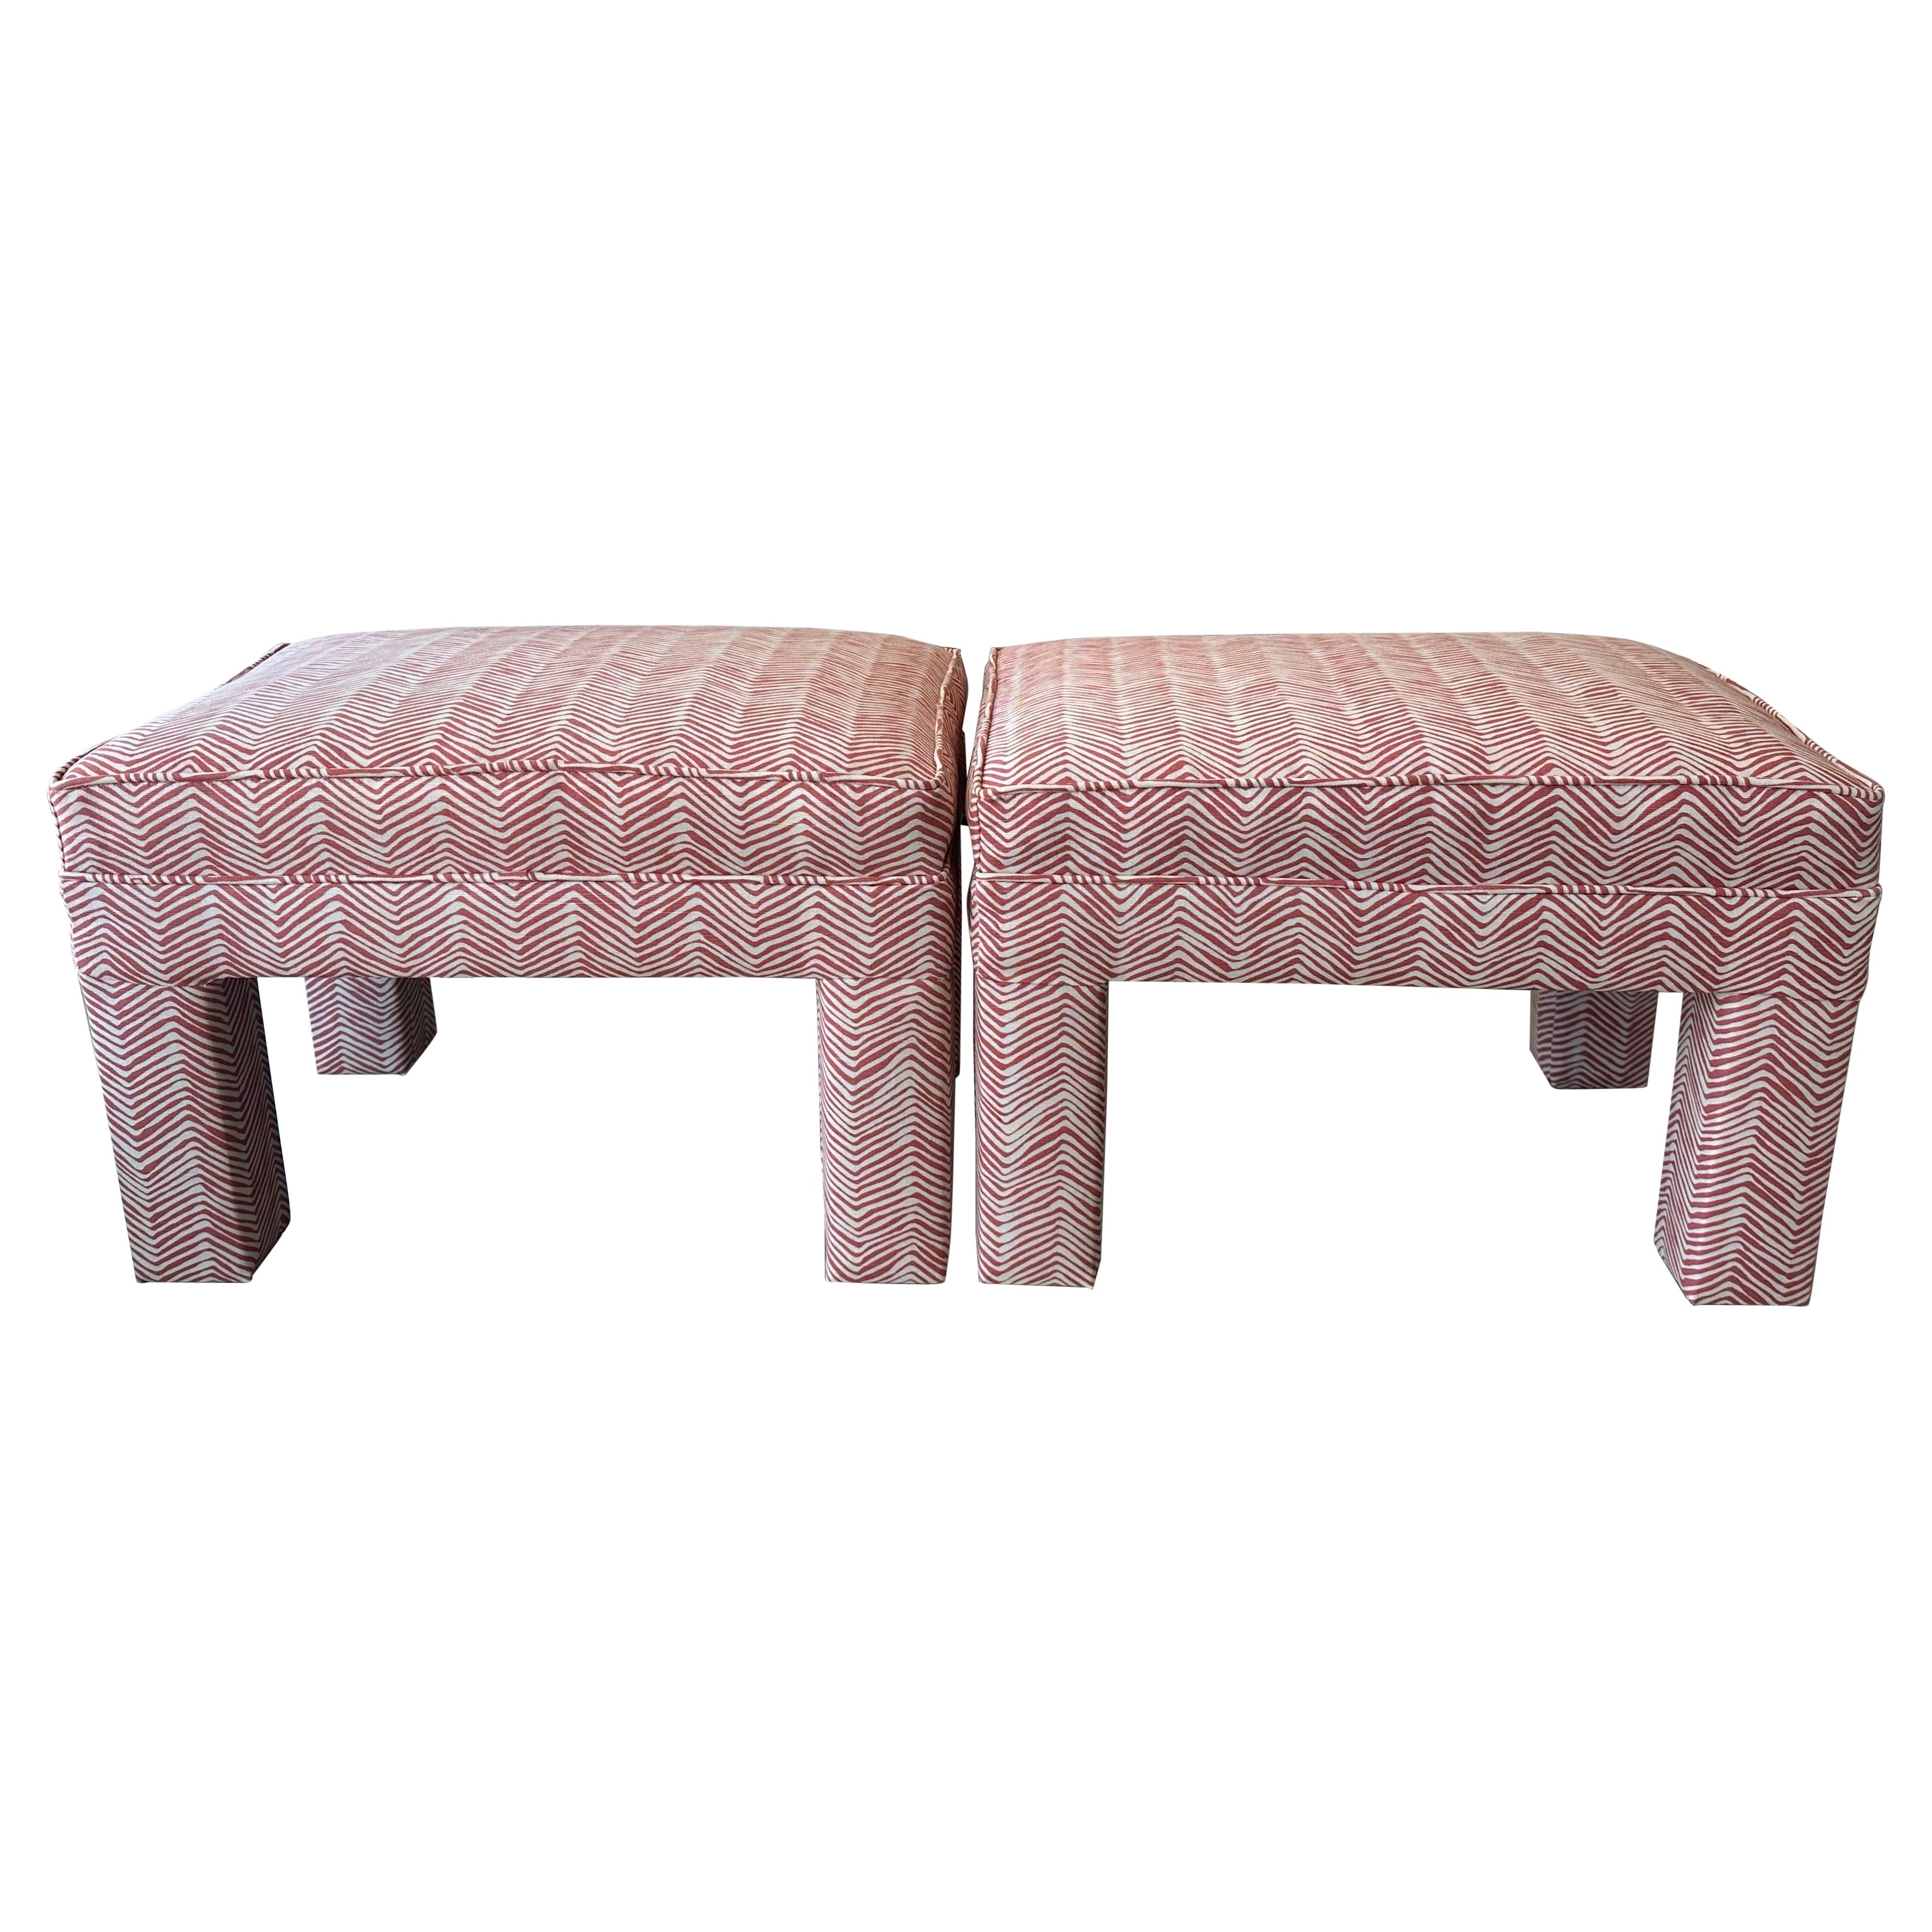 Vintage Pair Parsons Benches Stools Ottomans Newly Upholstered Coral Quadrille